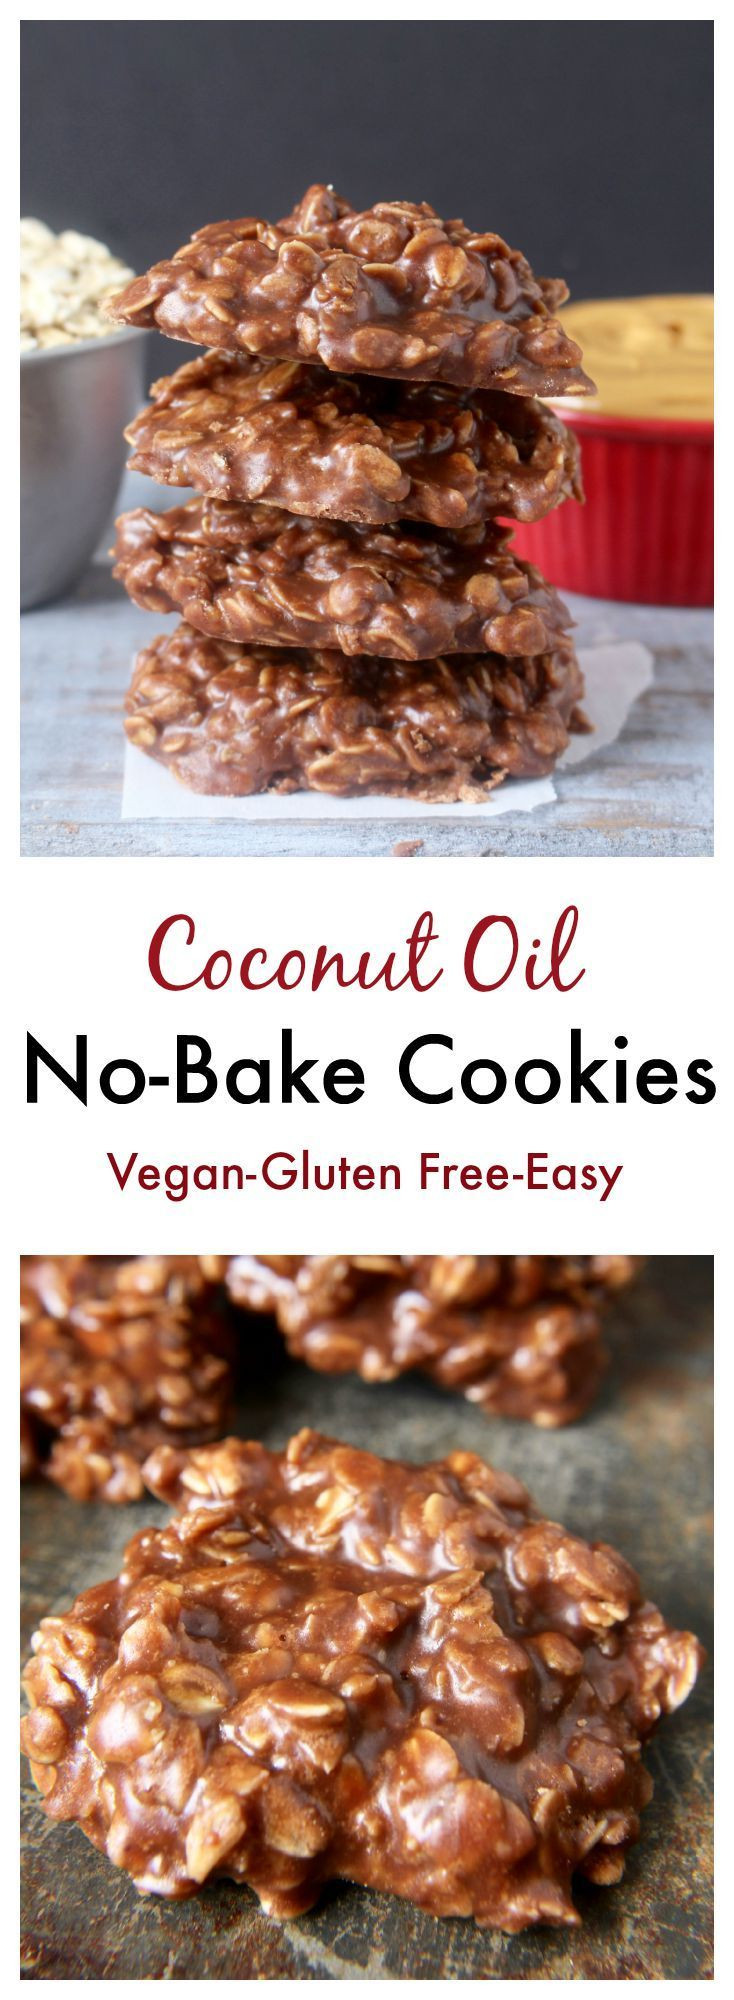 Easy Healthy Dessert Recipes
 90 best images about Gluten Free Food on Pinterest